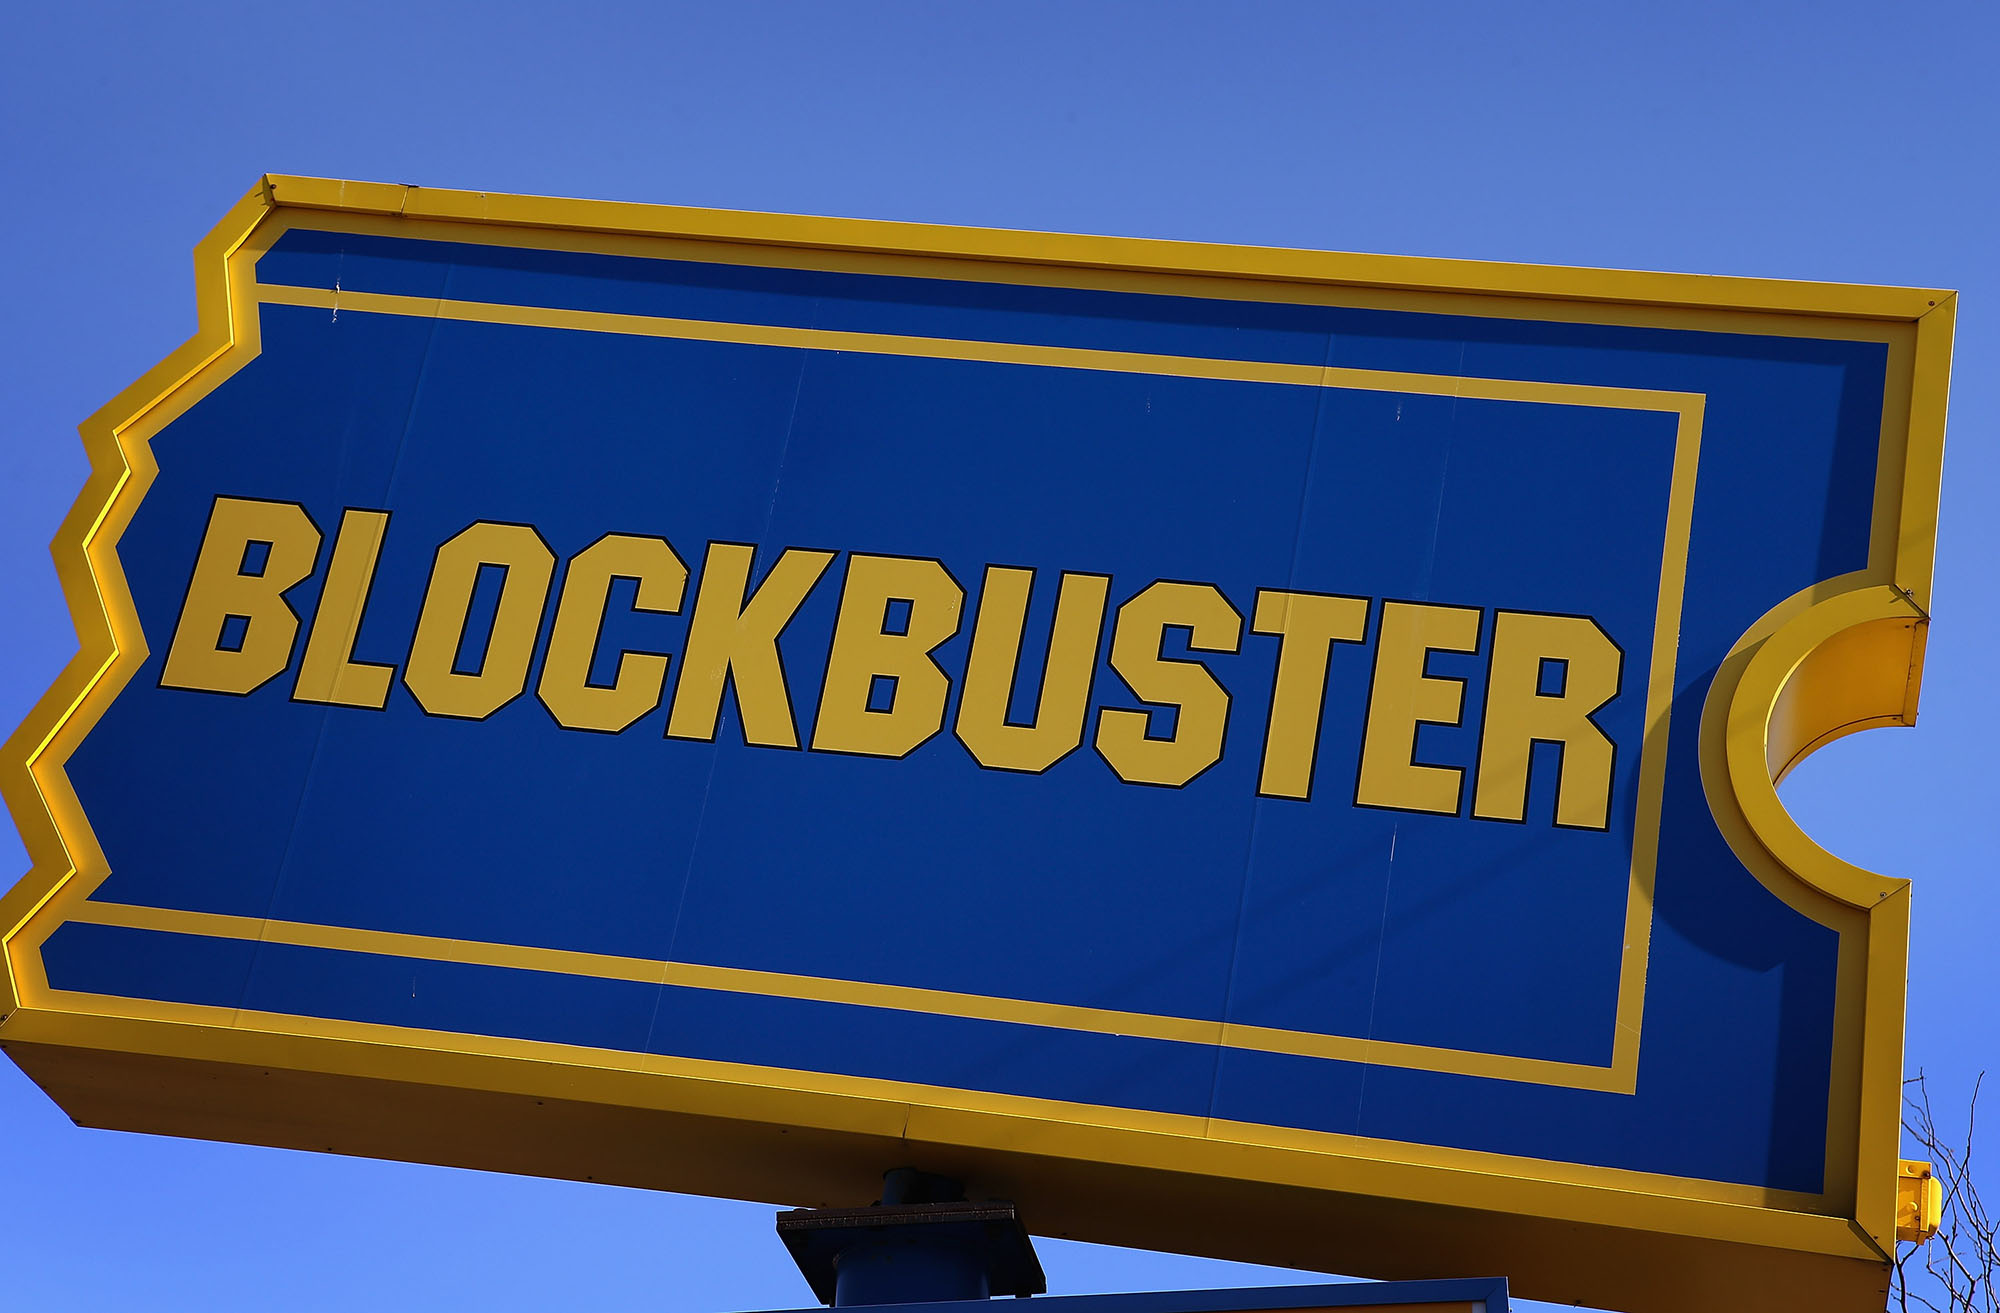 Blockbuster To Close 300 Stores In U.S.